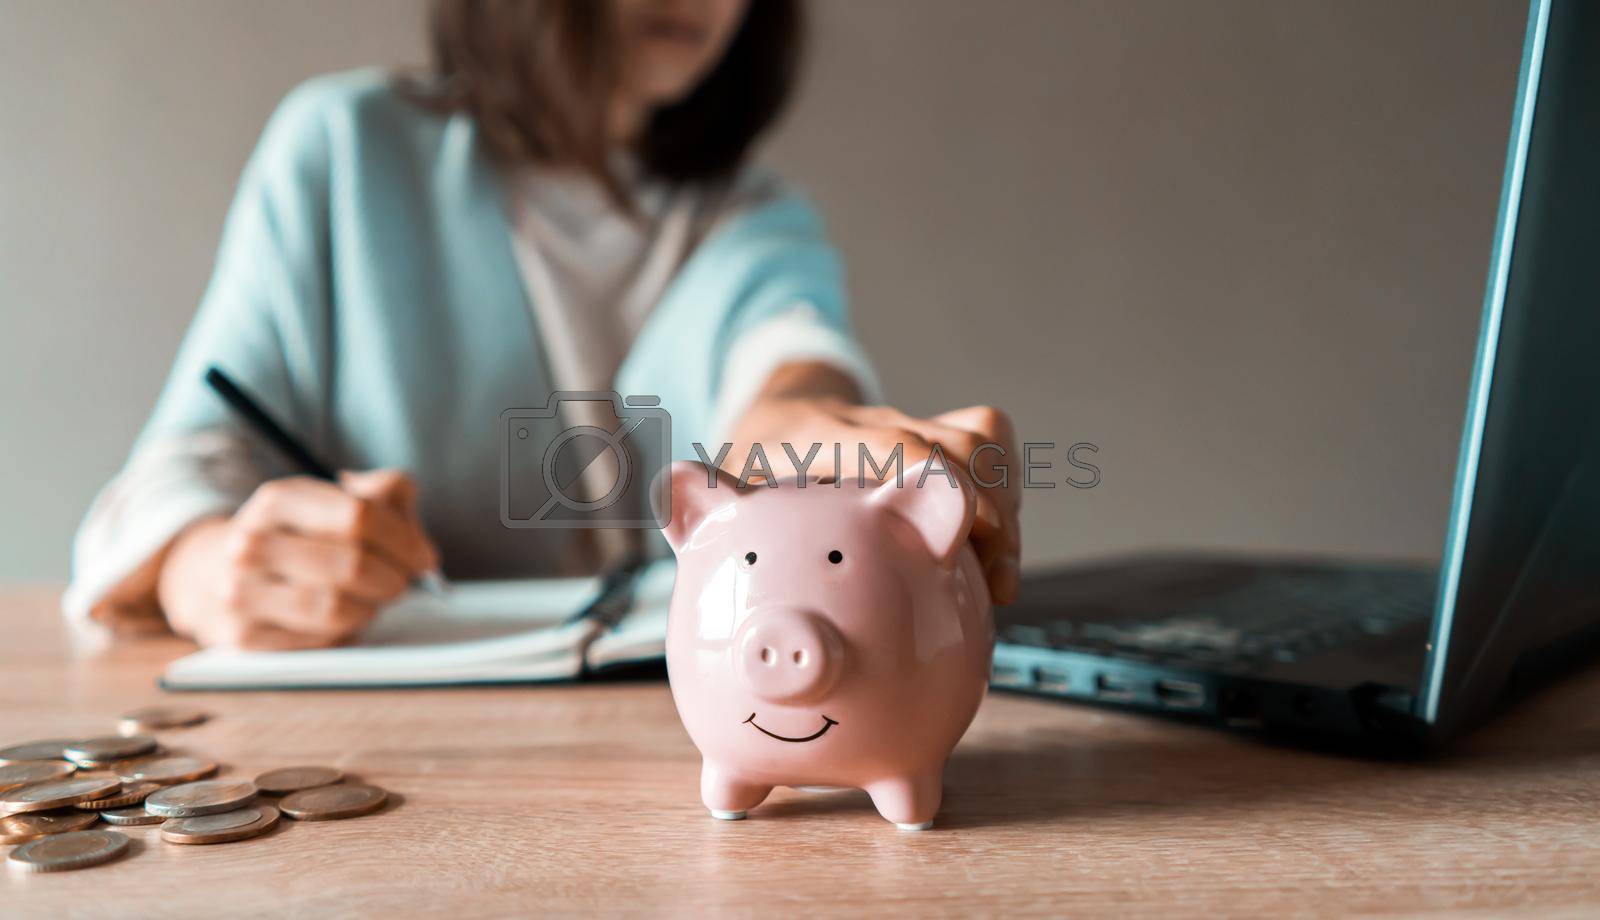 Royalty free image of Girl makes calculations, puts funds in a piggy bank. by africapink